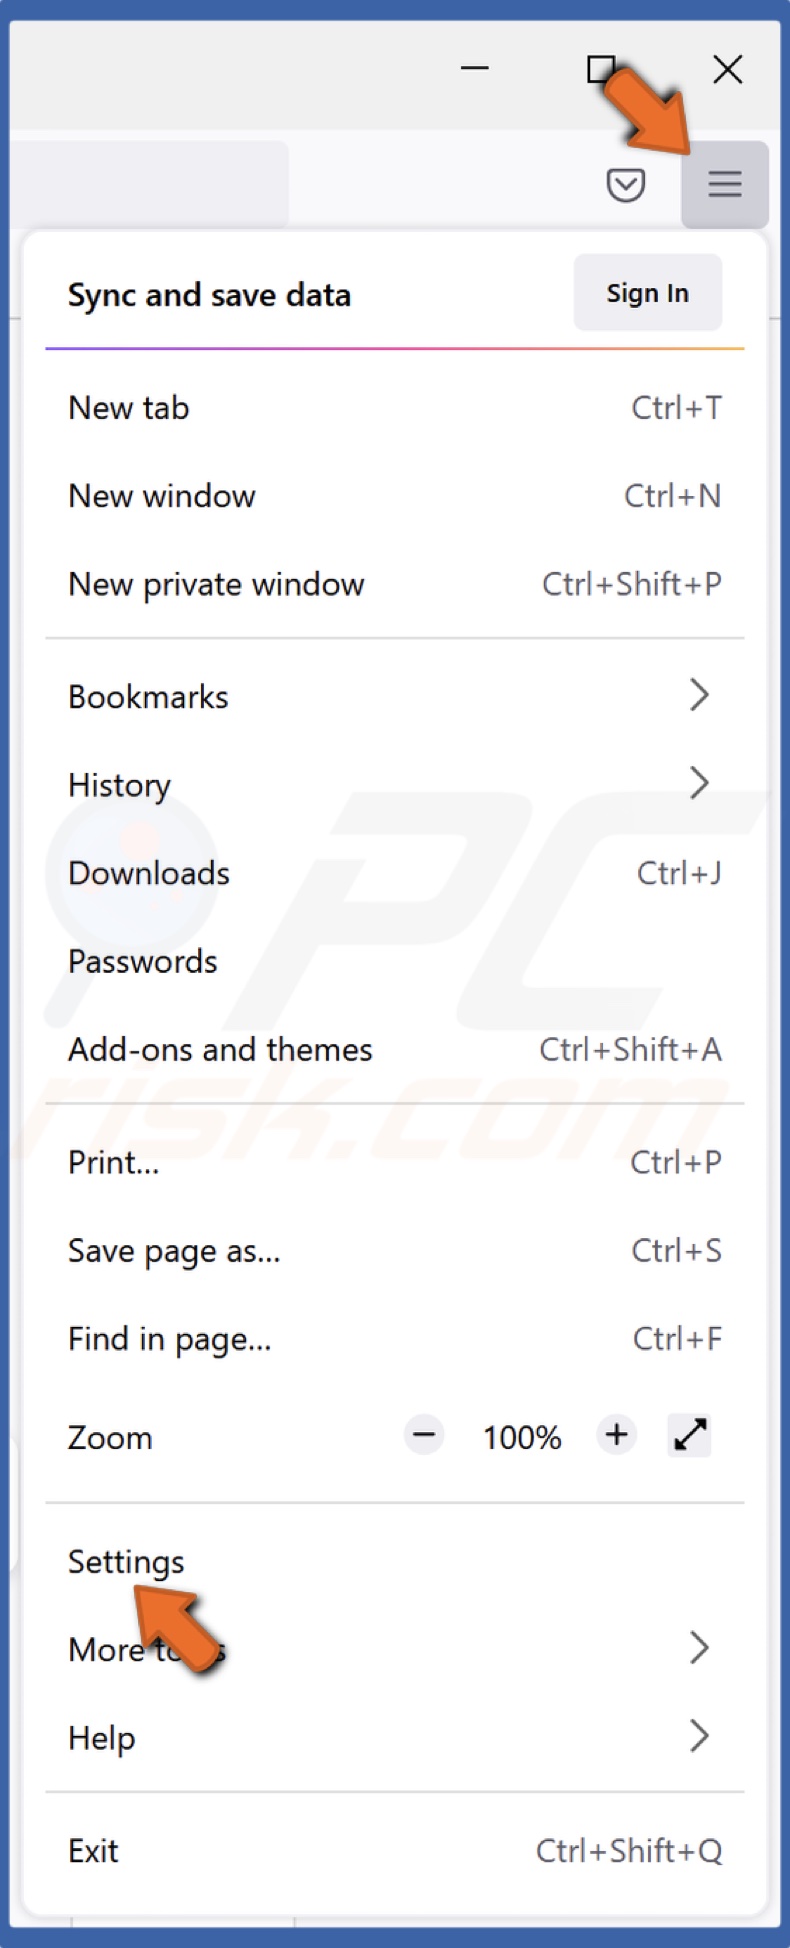 Open the Foirefox menu and click Settings